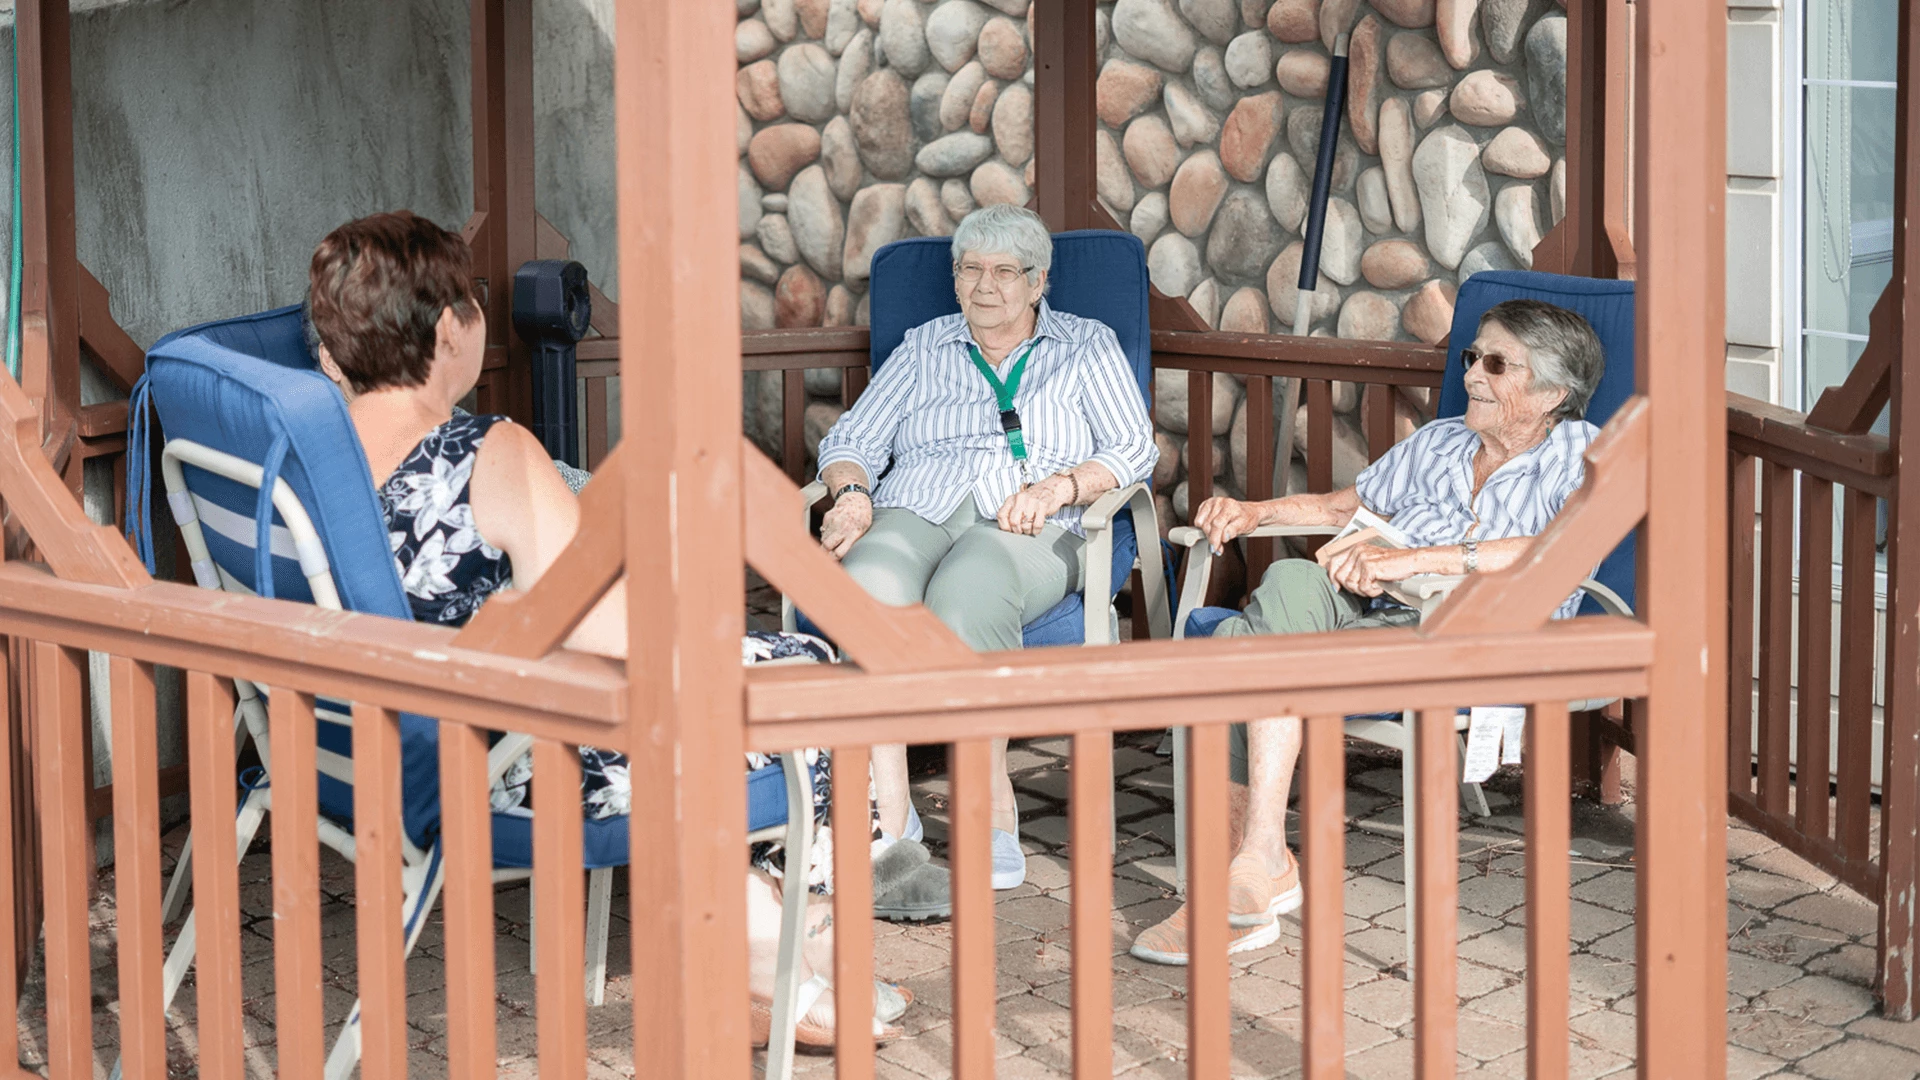 In the patio's shadow, three elderly people are seated and smiling